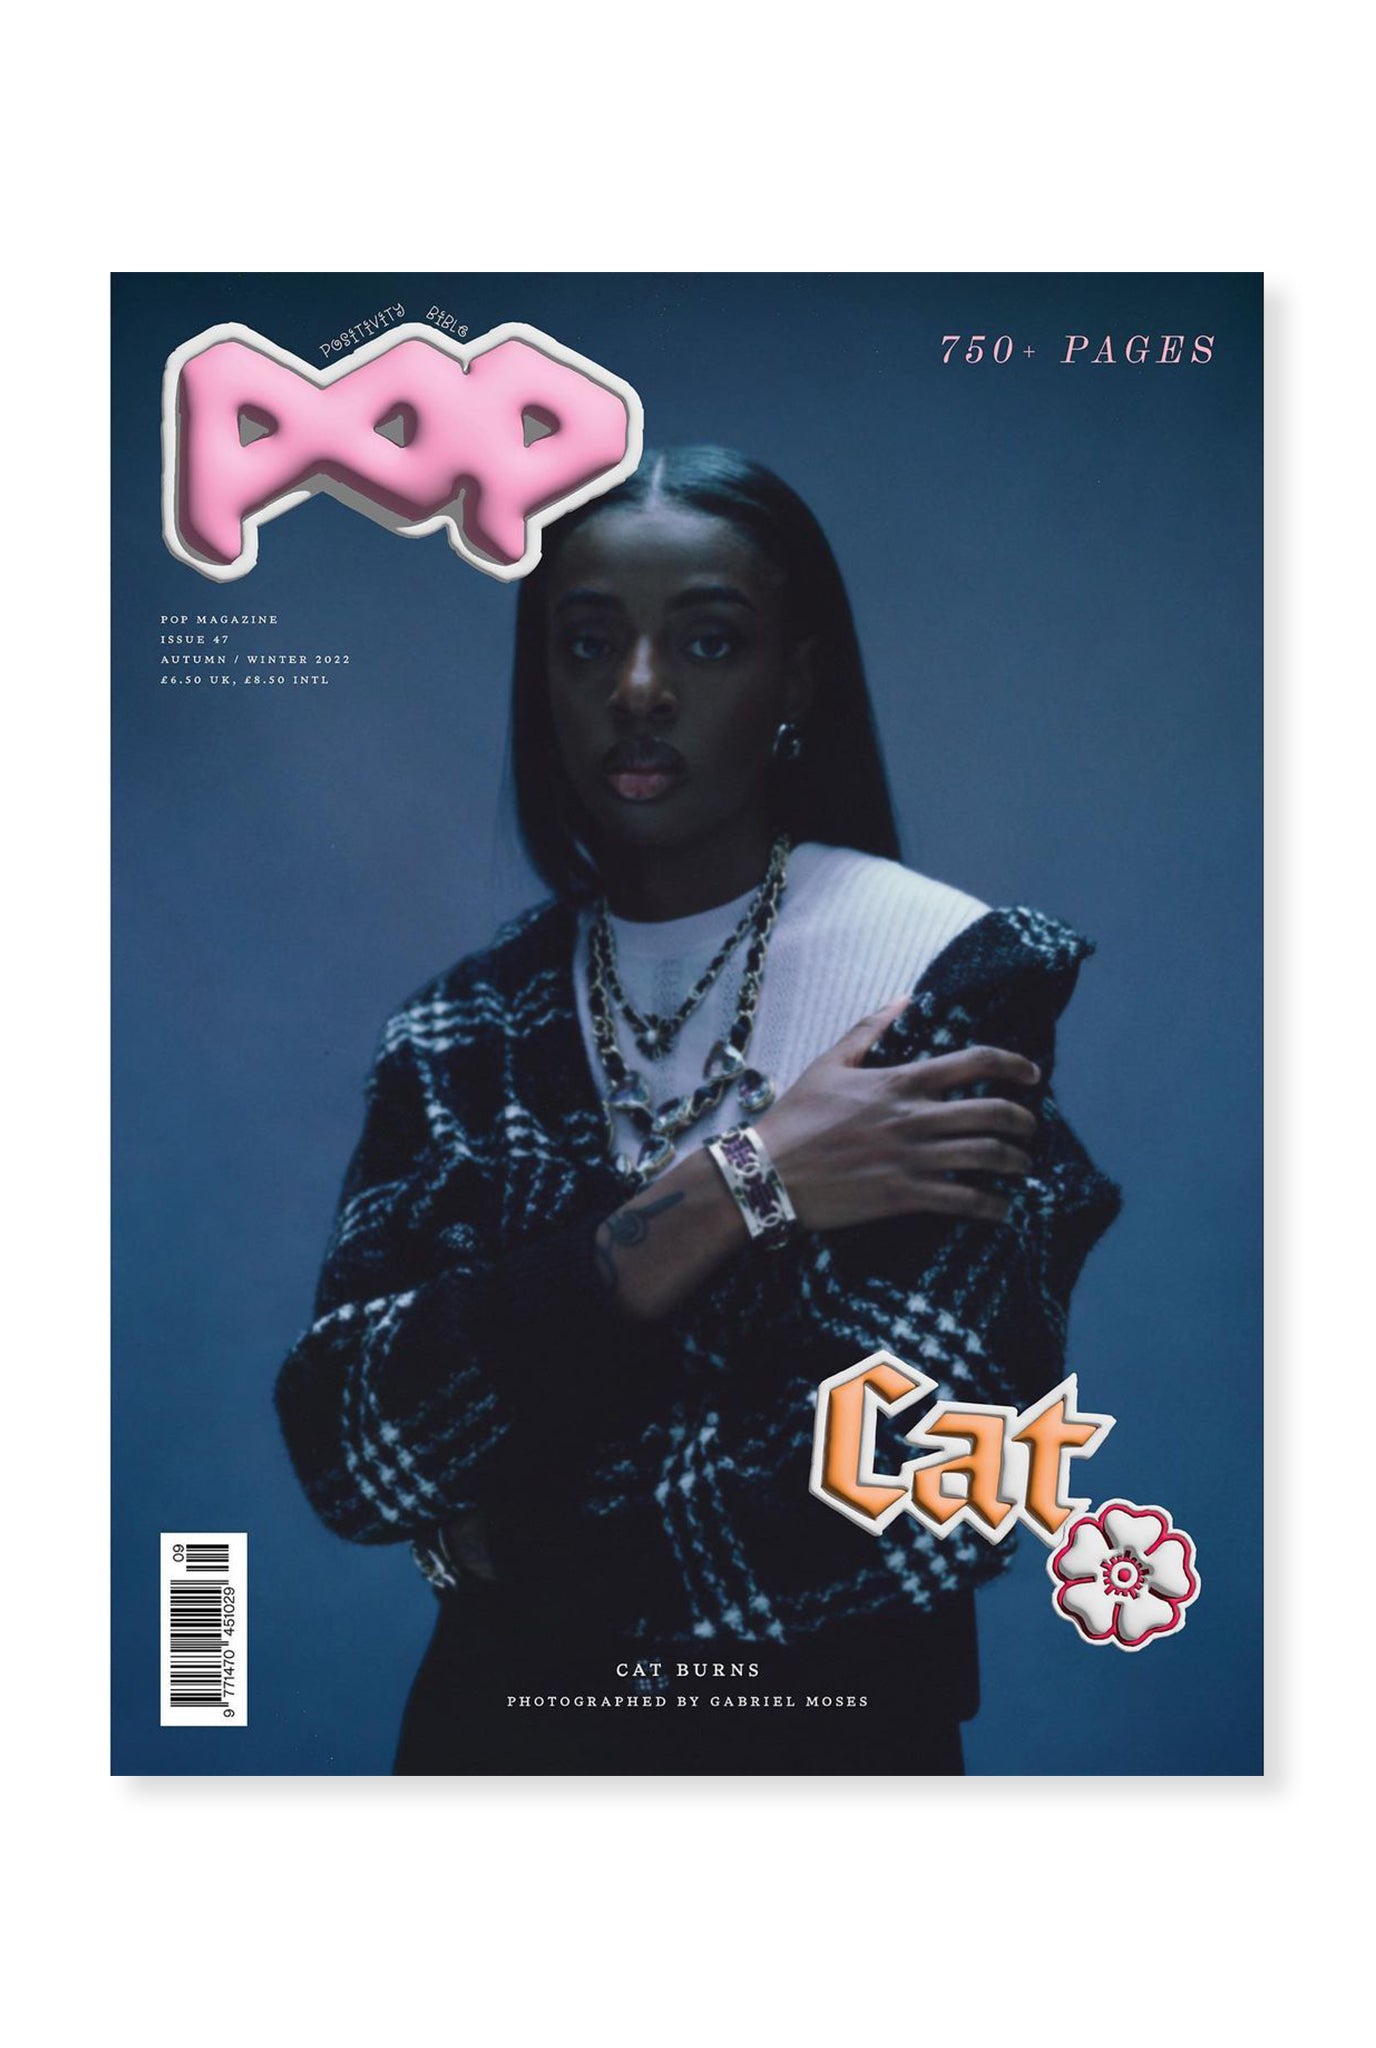 POP, Issue 47